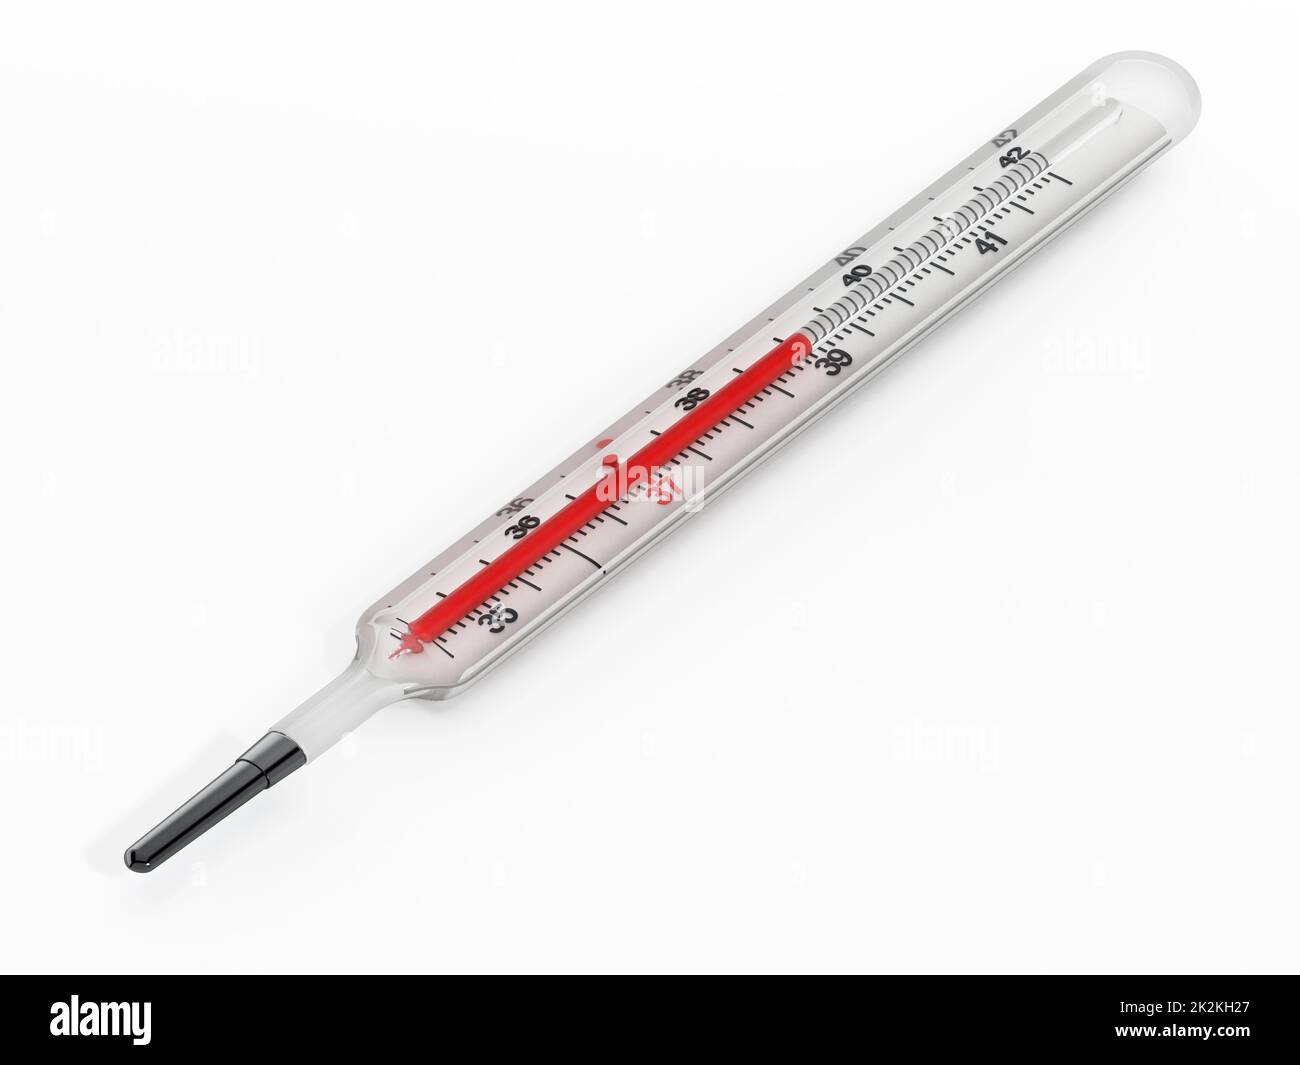 Clinical and Weather Thermometer Stock Vector - Illustration of white,  mercury: 19884311